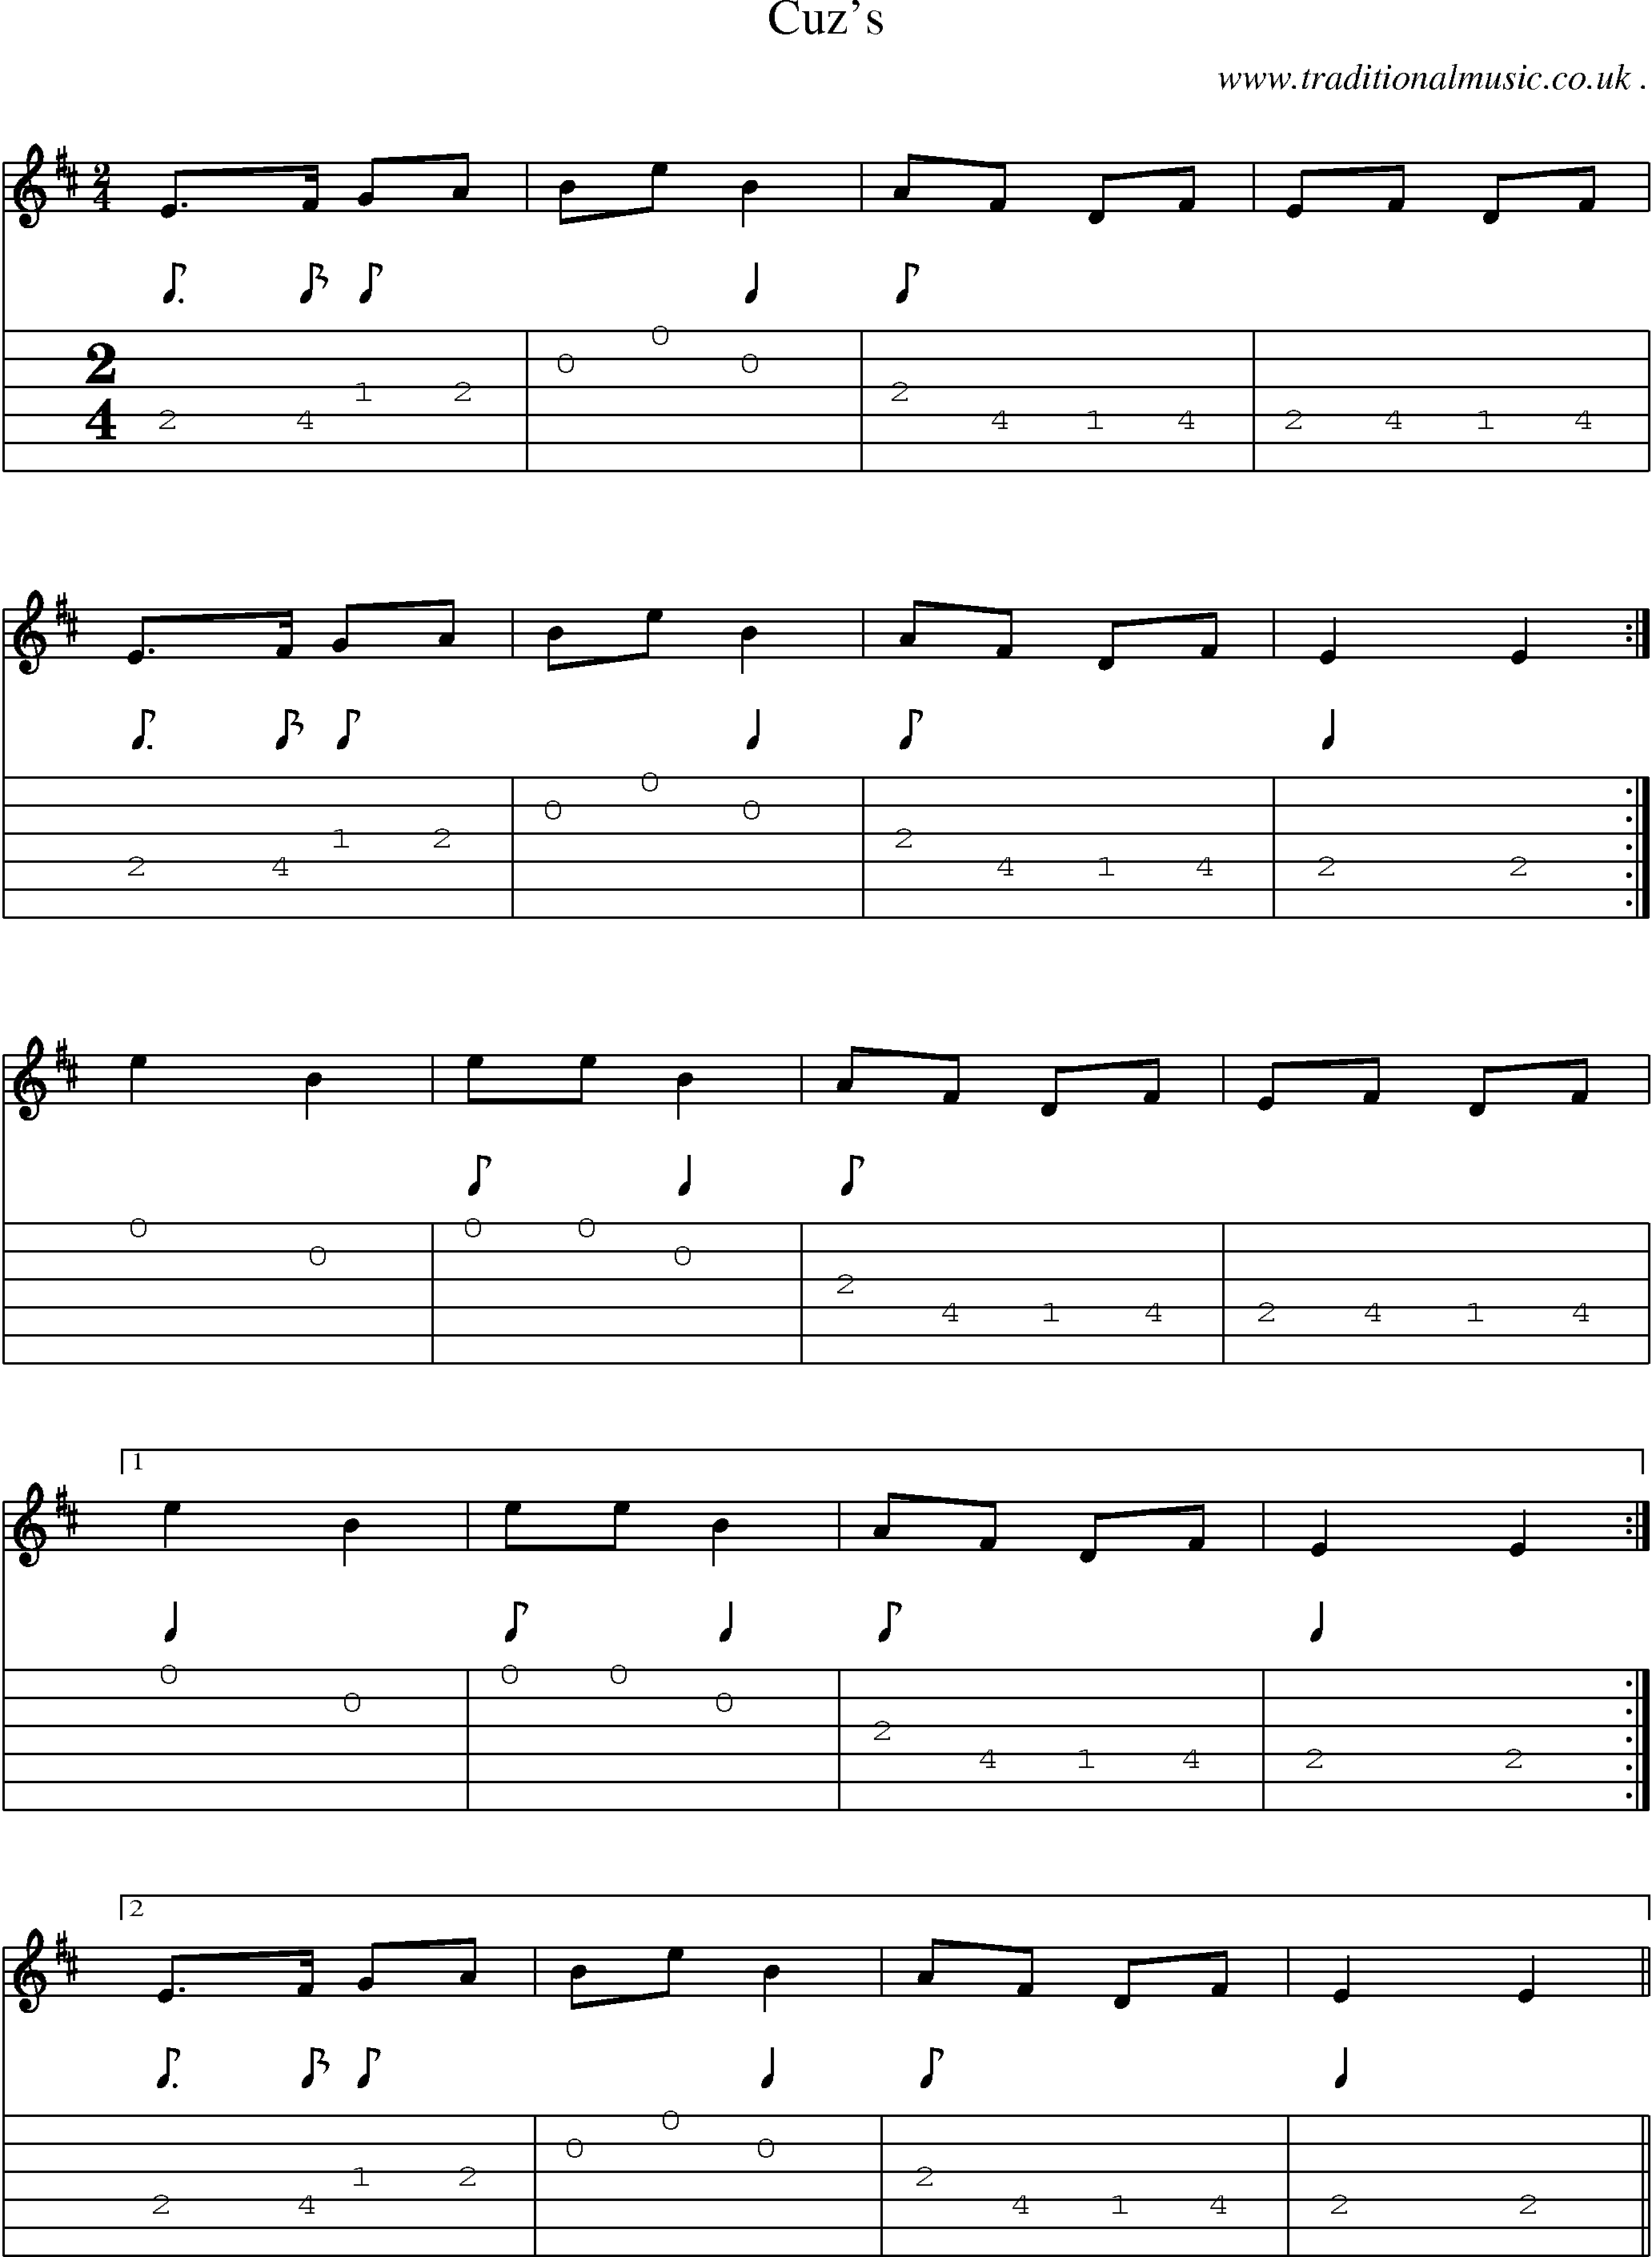 Sheet-Music and Guitar Tabs for Cuzs